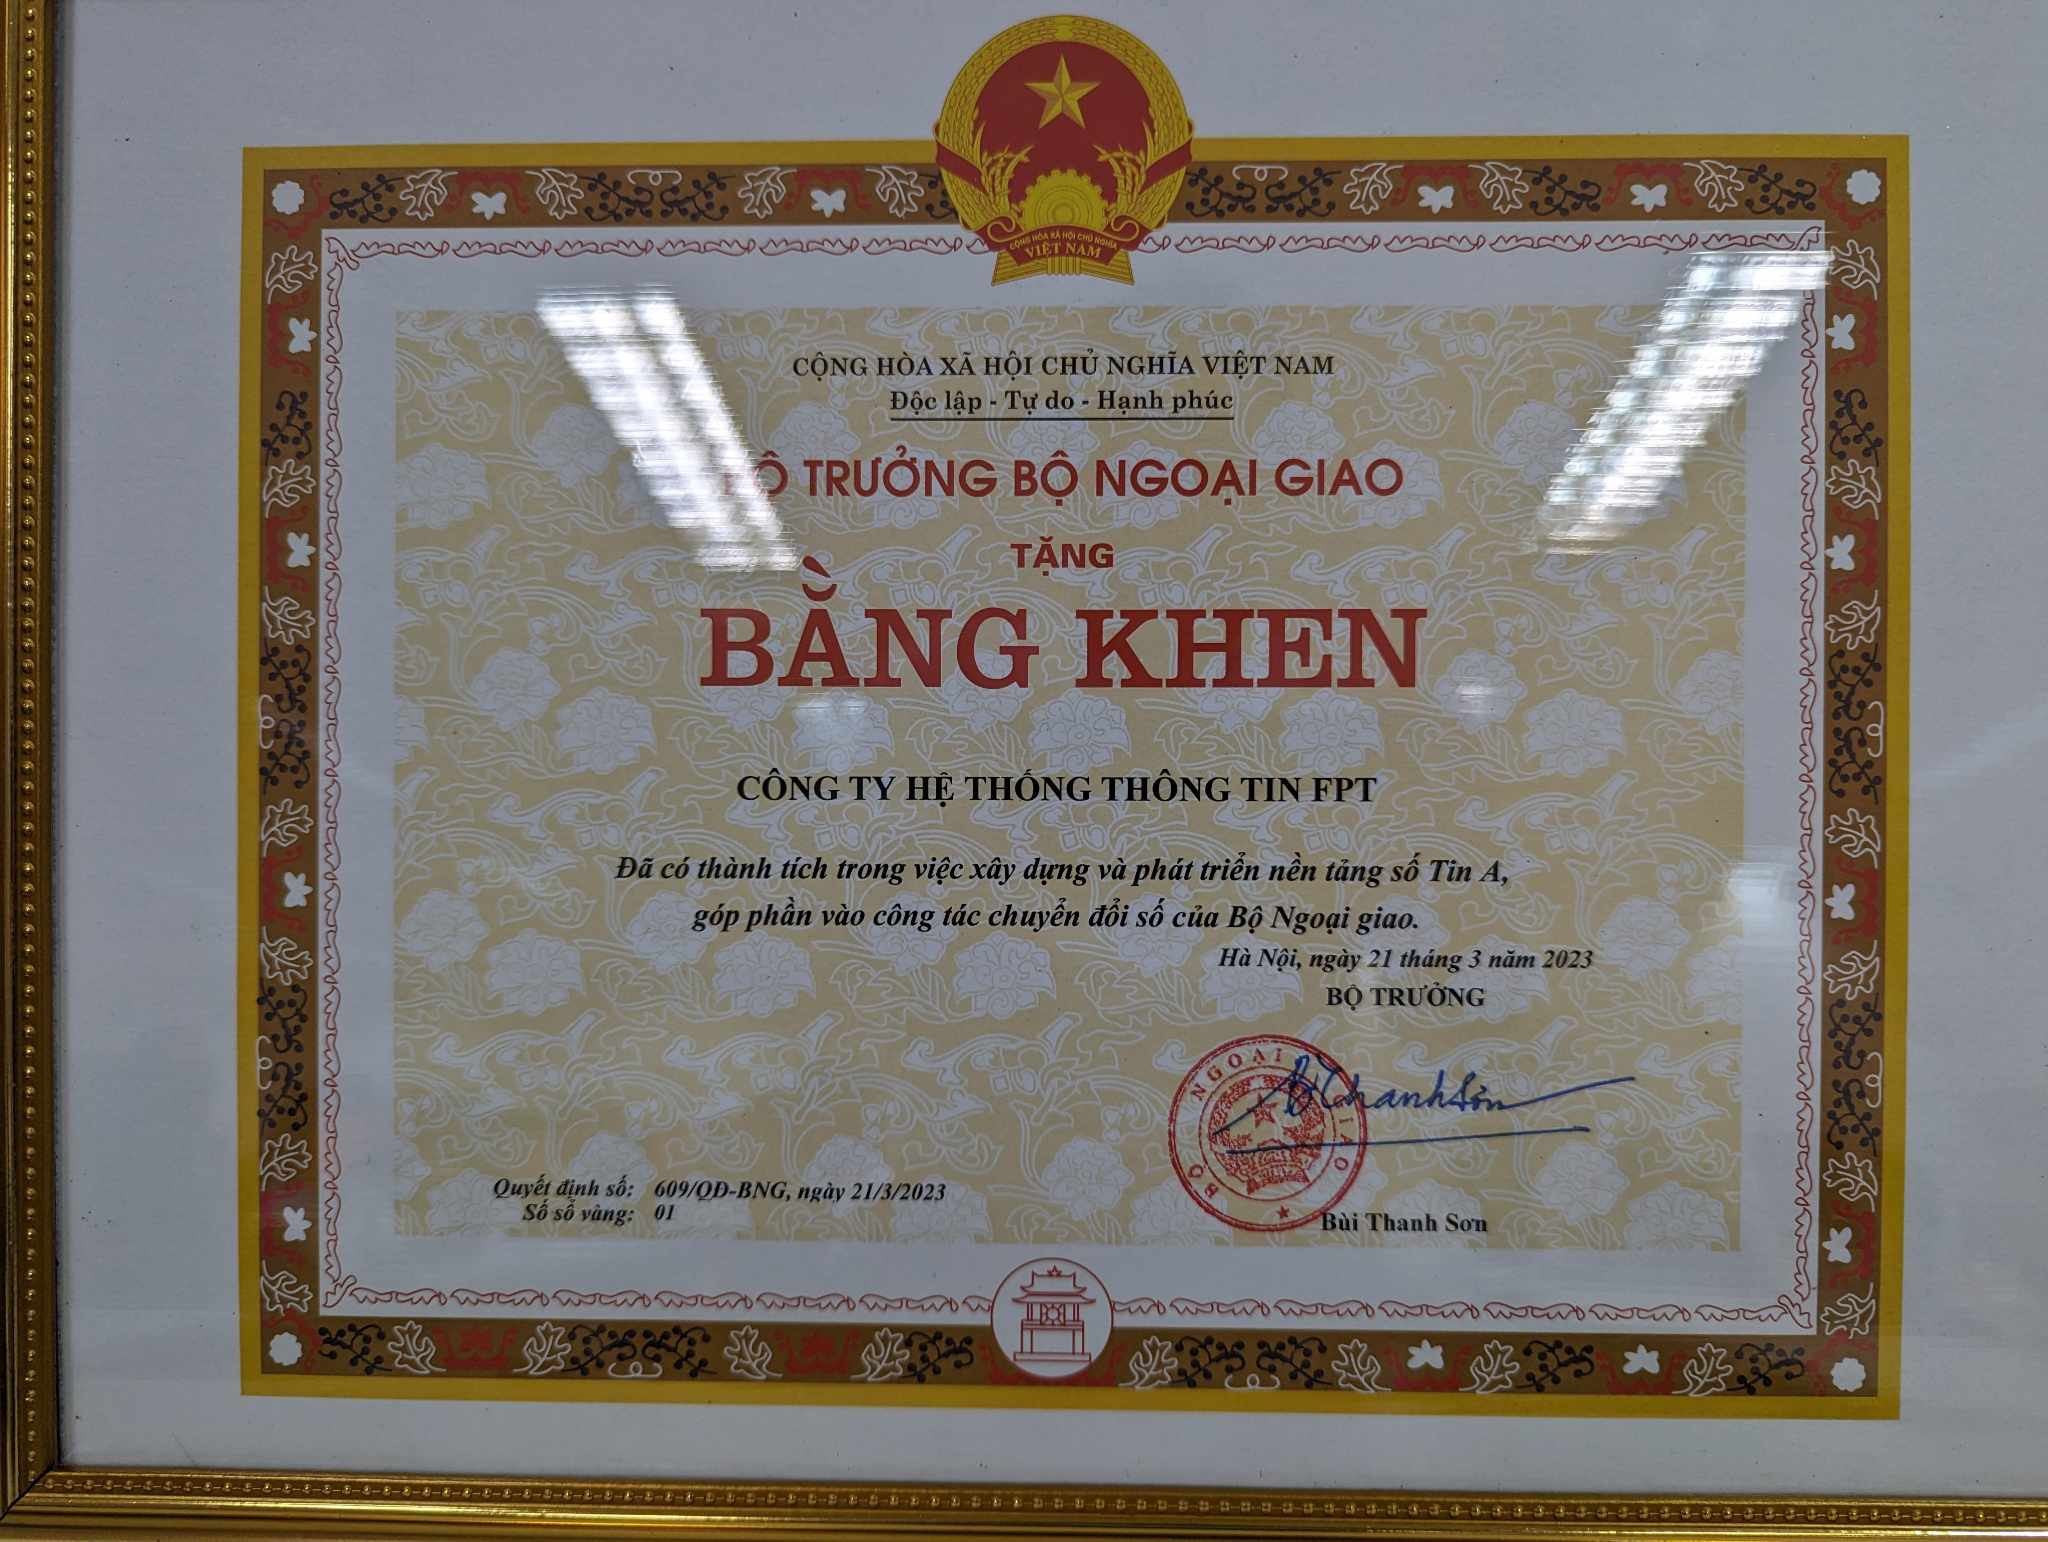 Certificate of Merit from Vietnam’s Minister of Foreign Affairs for the development of Newsletter A Digital Platform (a milestone in the digital transformation of Vietnam Ministry of Foreign Affairs)